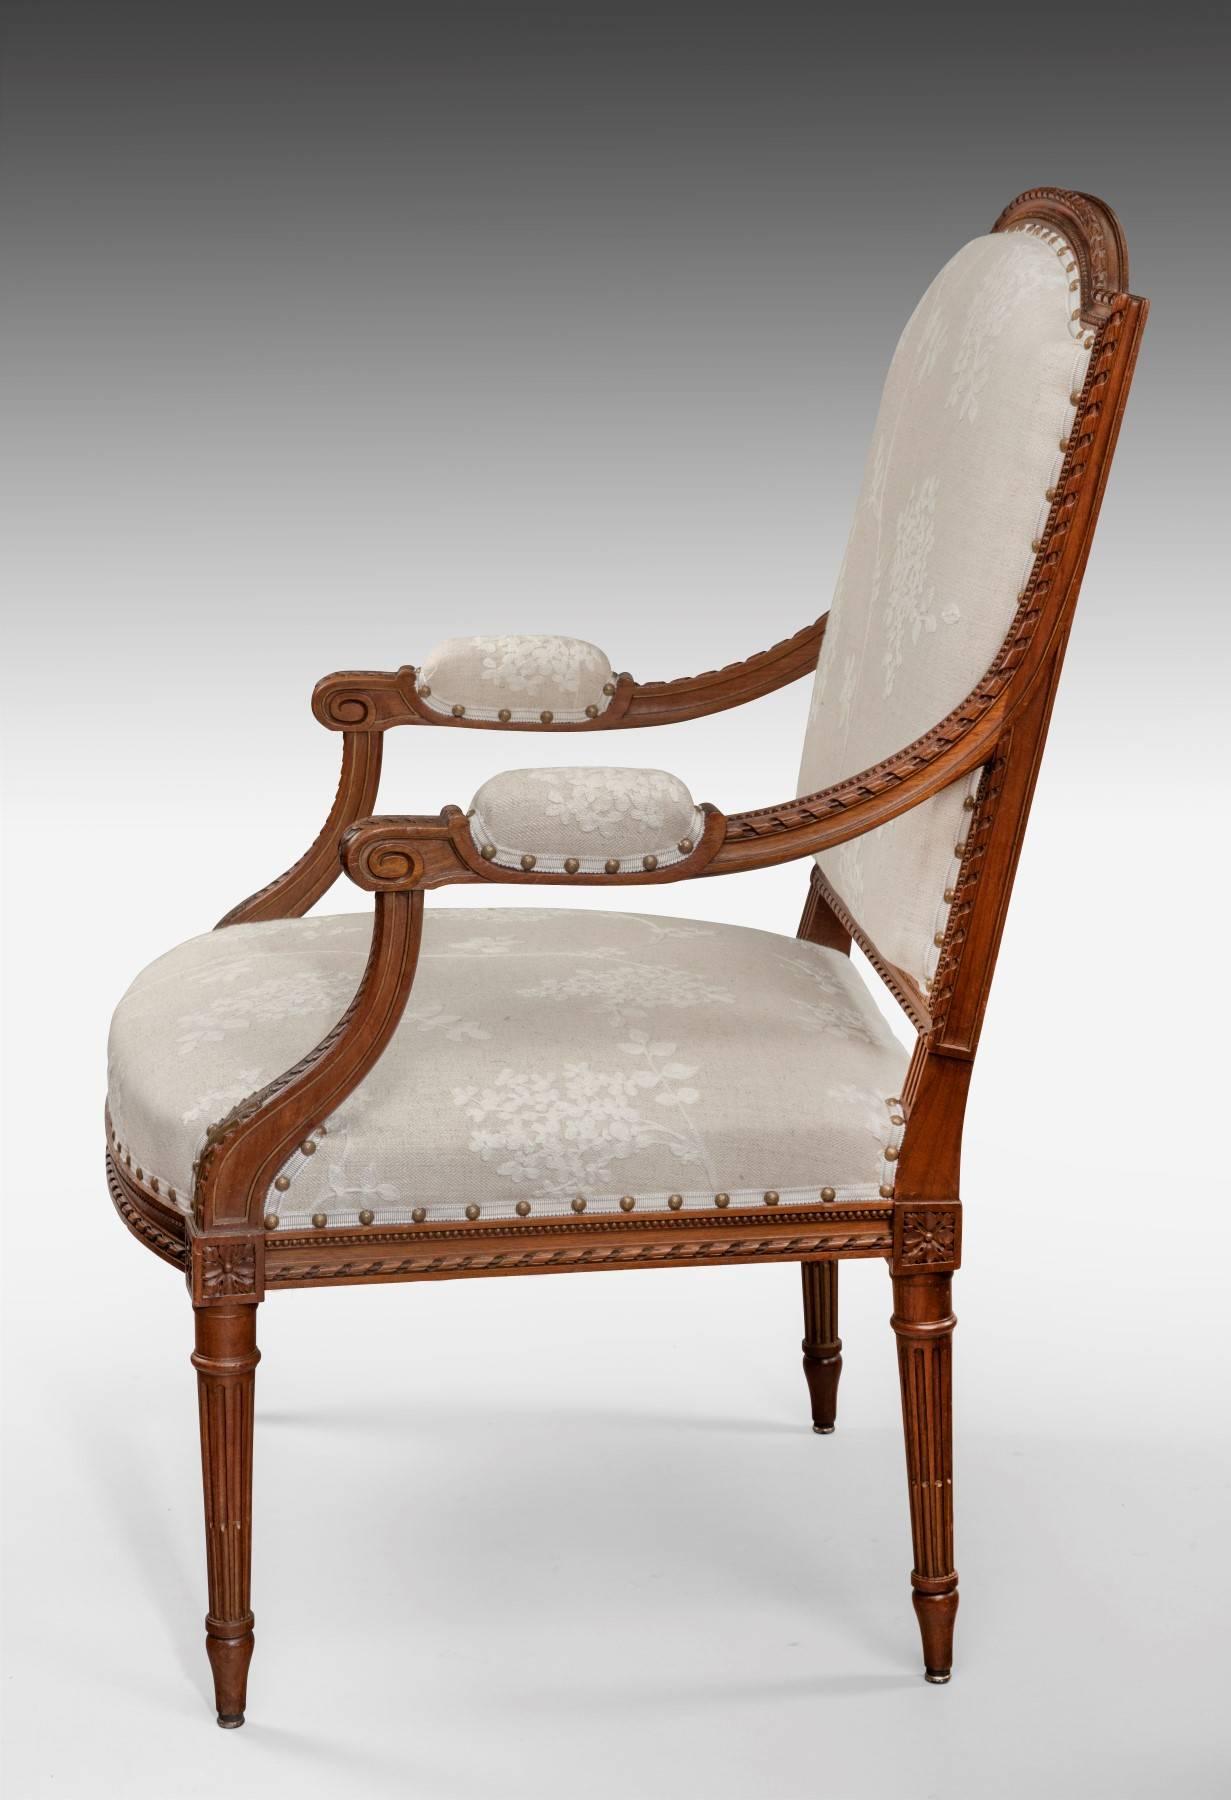 Upholstery A Pair of Large 19th Century French Upholstered Armchairs